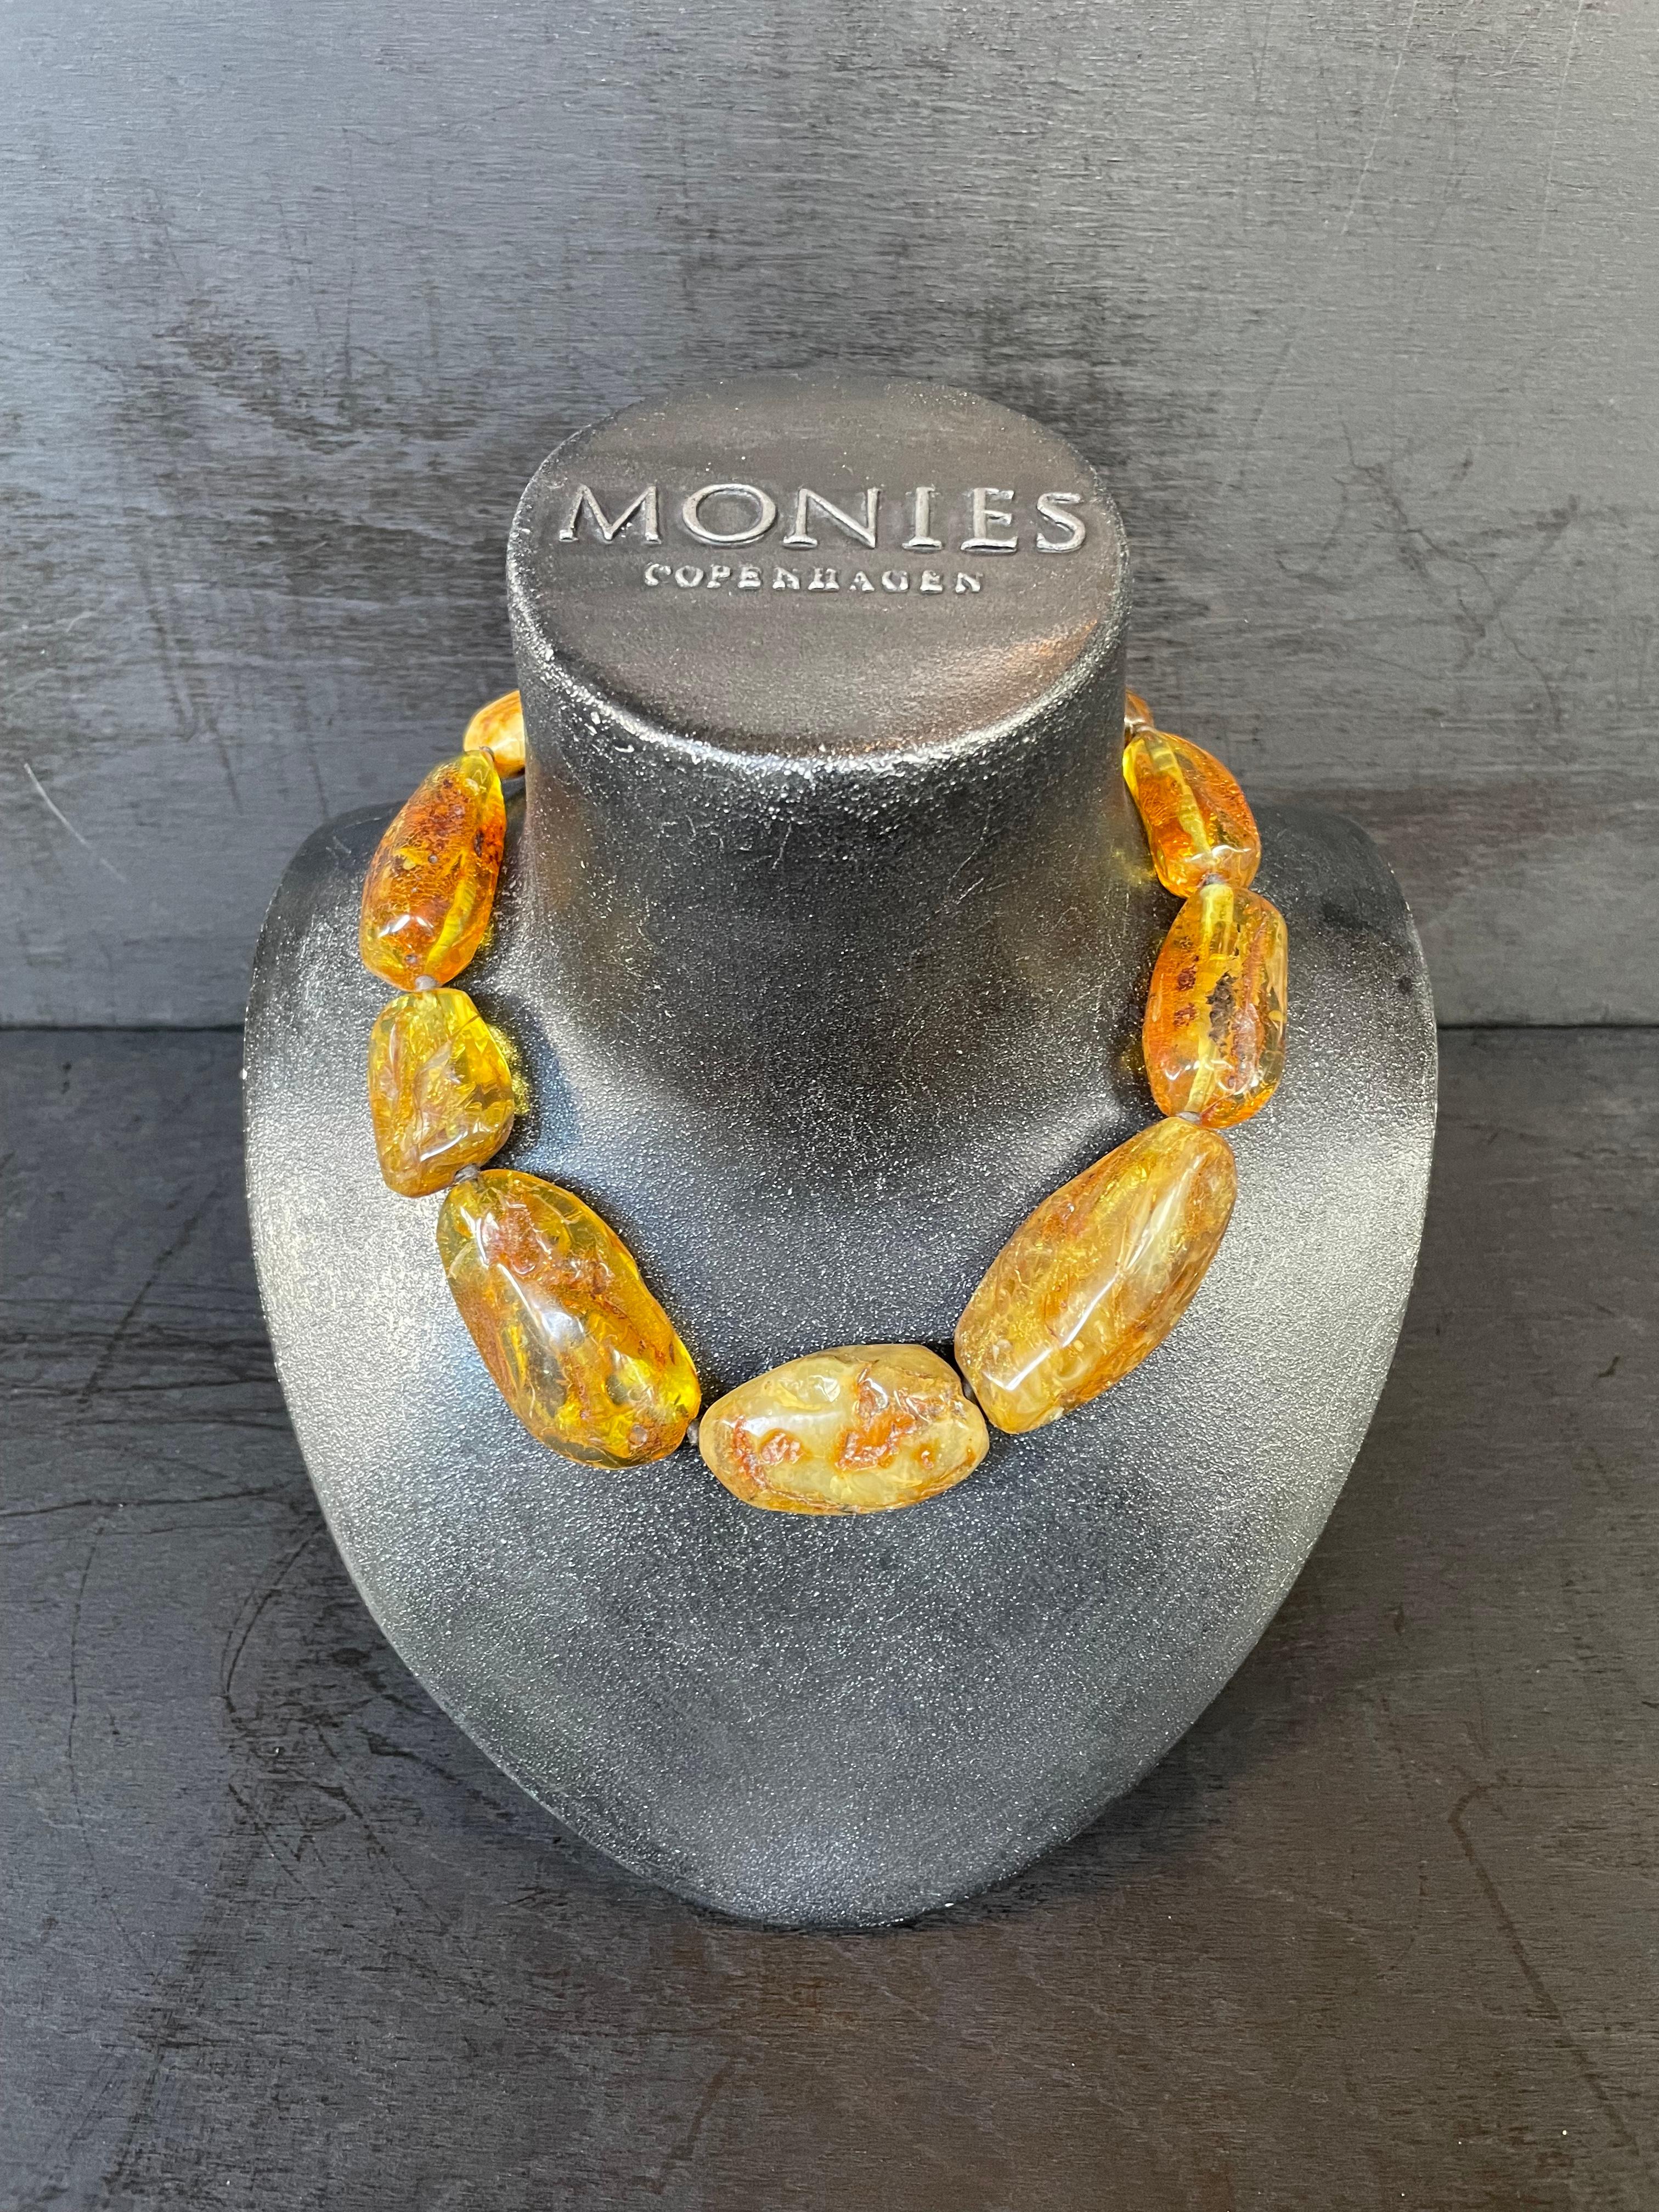 One-of-a-kind statement necklace from the Danish jewellery brand, Monies.
Made in Amber with a leather clasp.

Handcrafted in the Monies Atelier in Copenhagen.